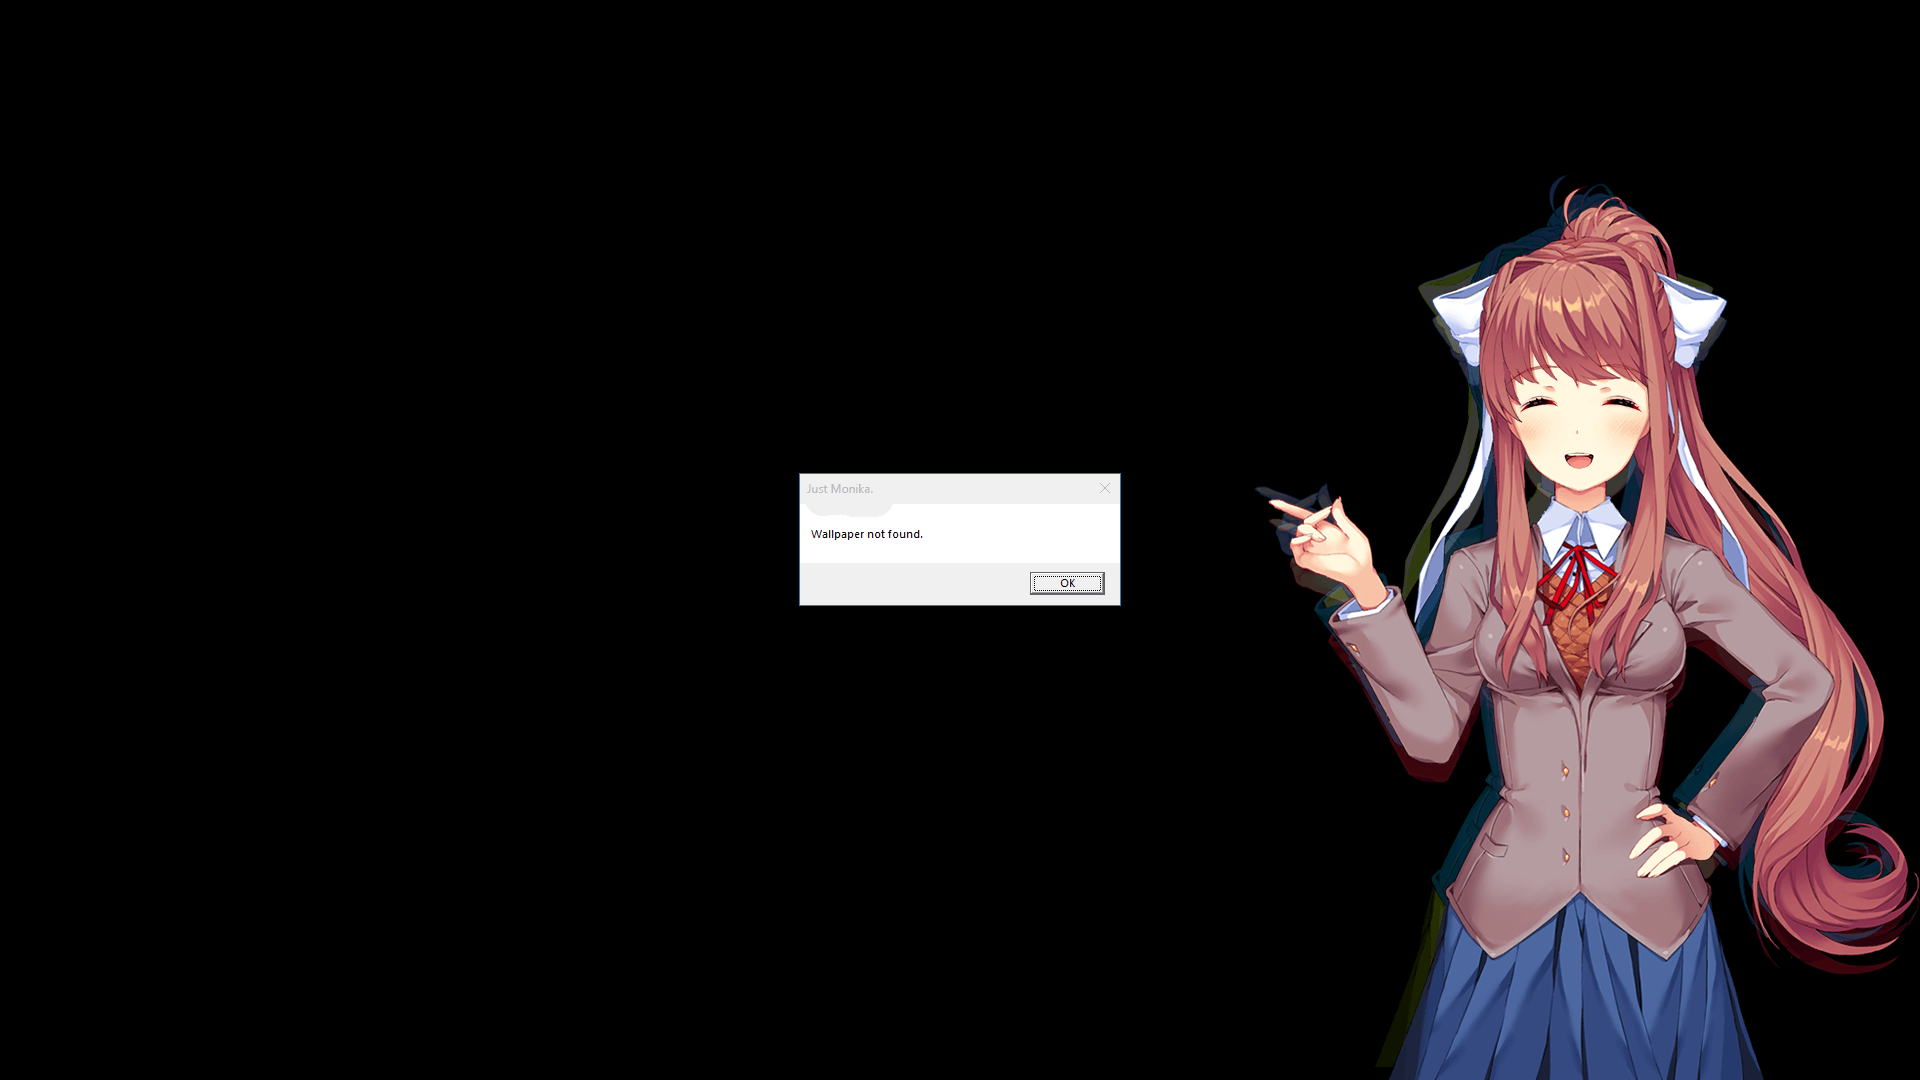 Who needs a wallpaper when you have Monika?